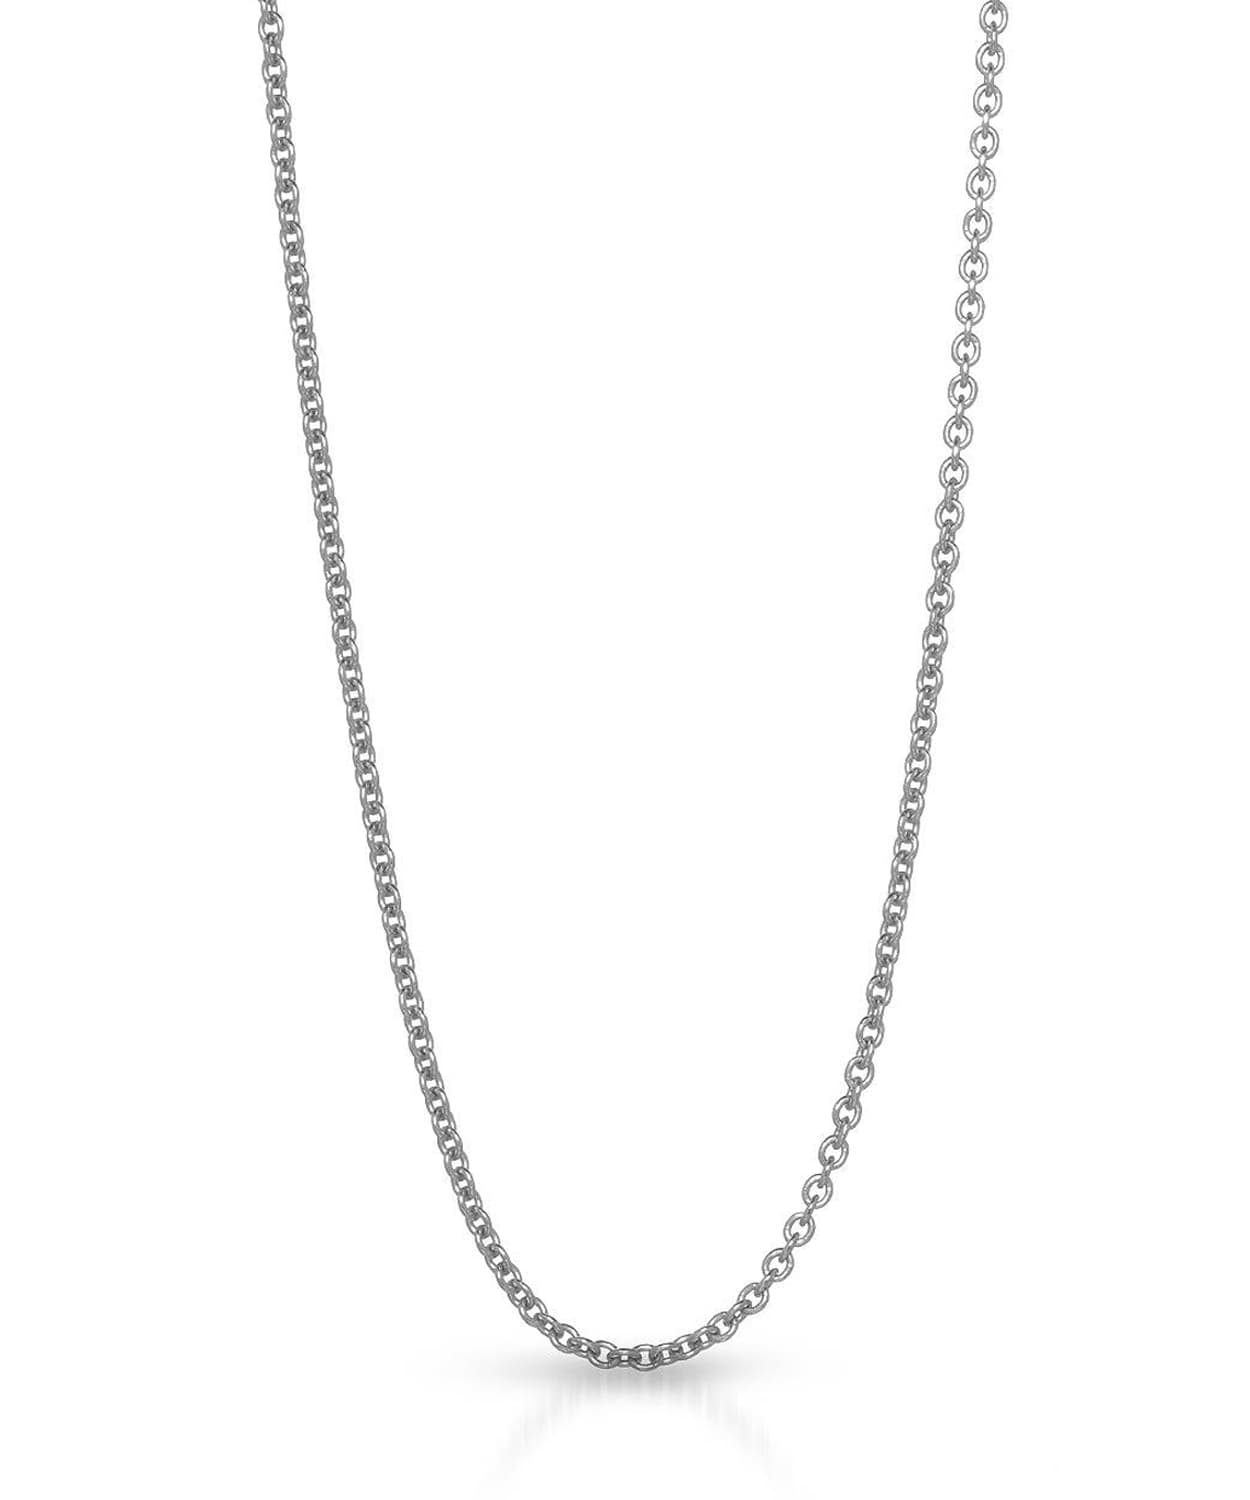 1mm 14k White Gold Rolo Adjustable Chain View 1